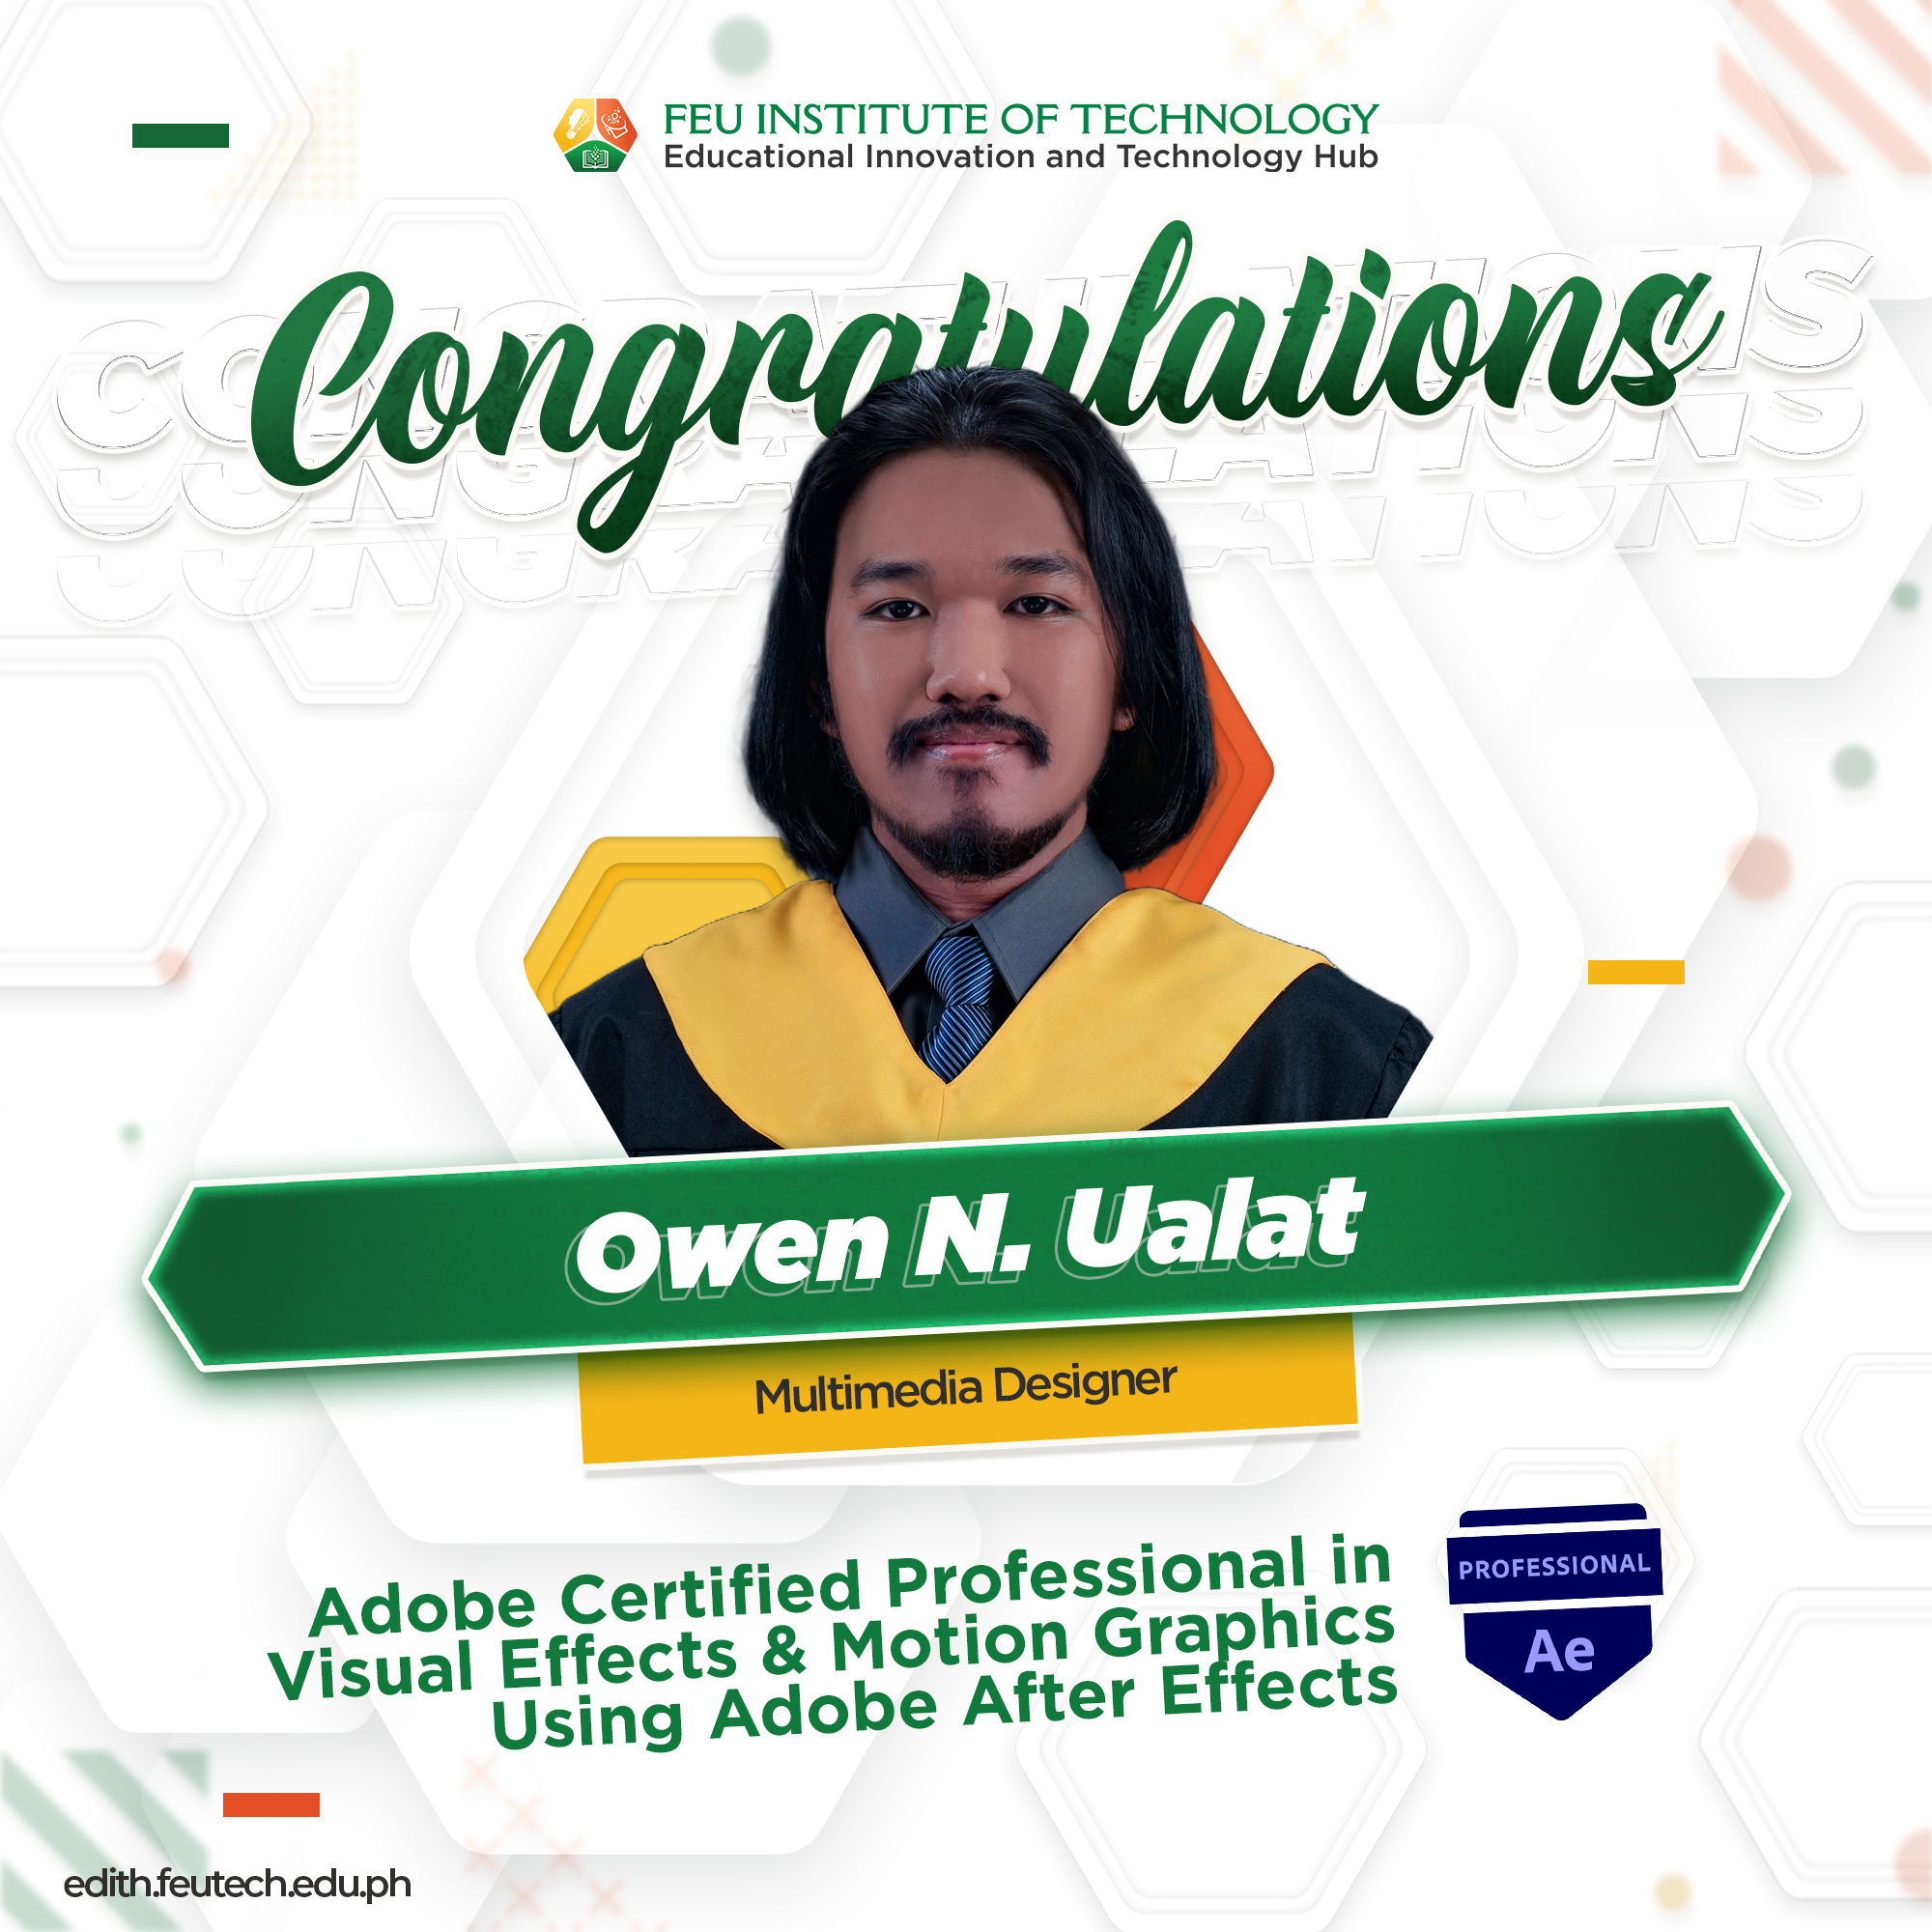 Owen N. Ualat is now an Adobe Certified Professional in Visual Effects & Motion Graphics Using Adobe After Effects